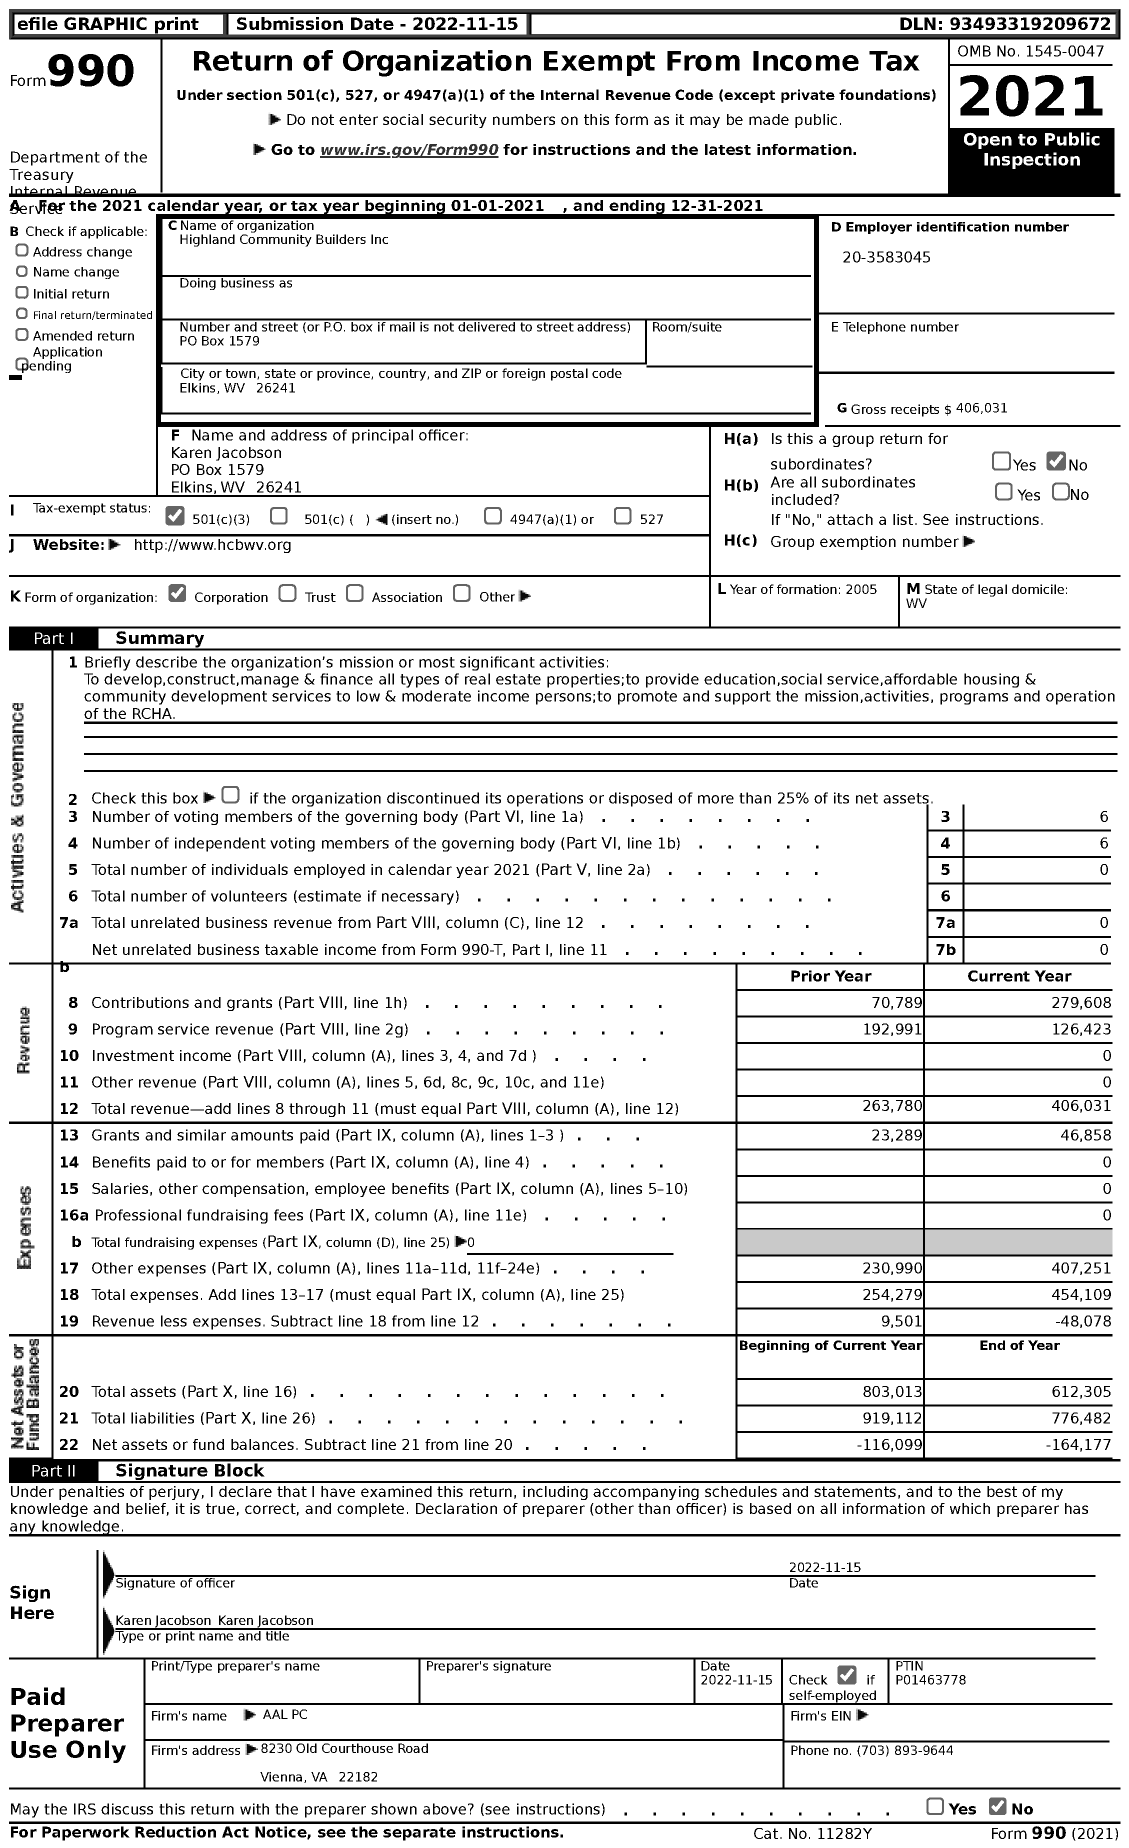 Image of first page of 2021 Form 990 for Highland Community Builders